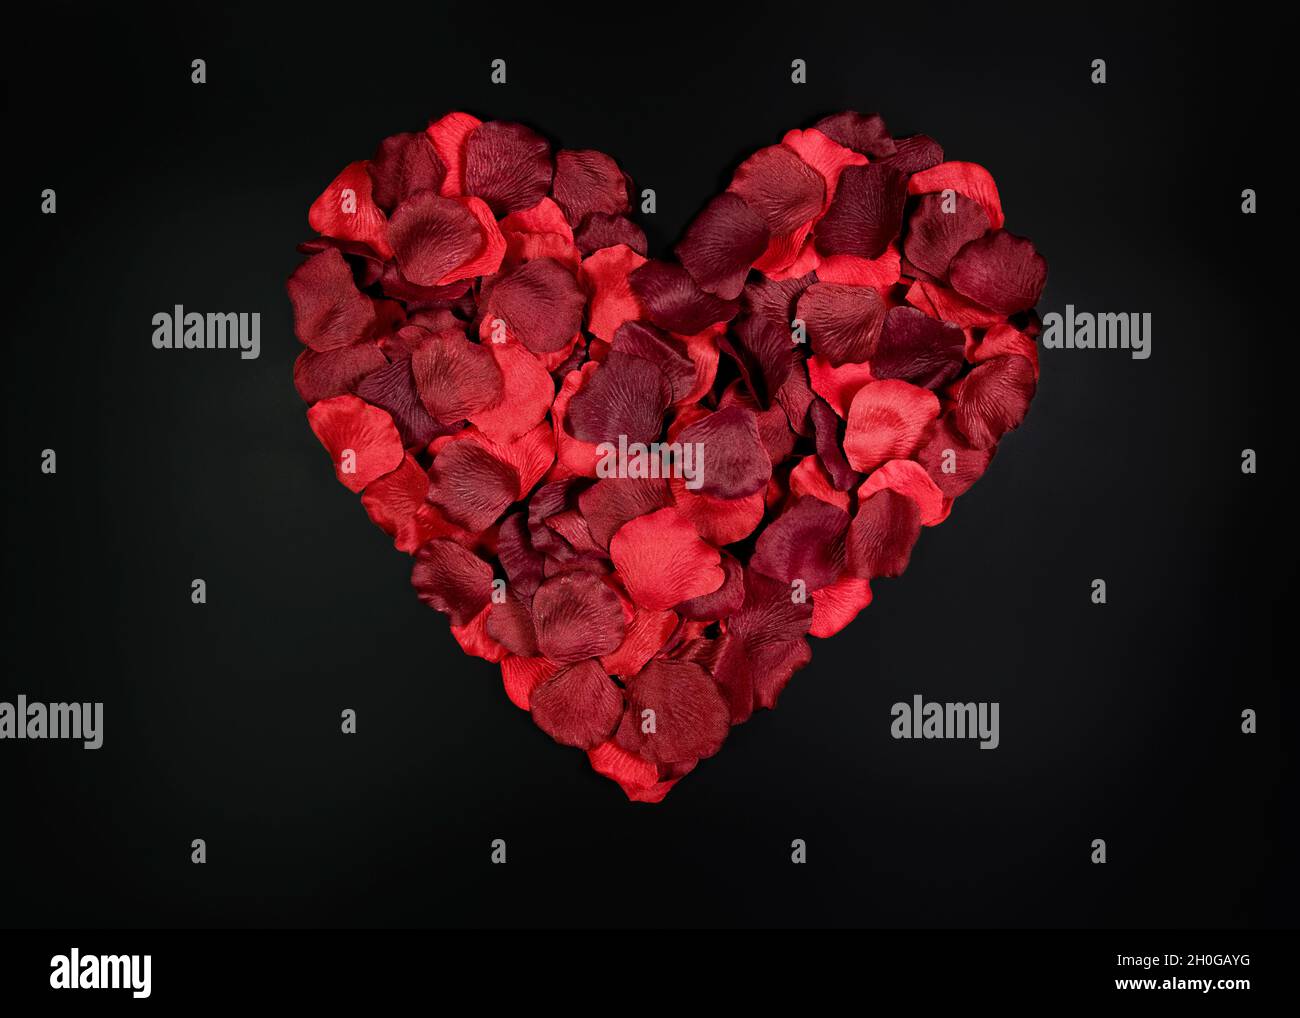 Red petals shaped into a heart on plain black background representing love and romance Stock Photo